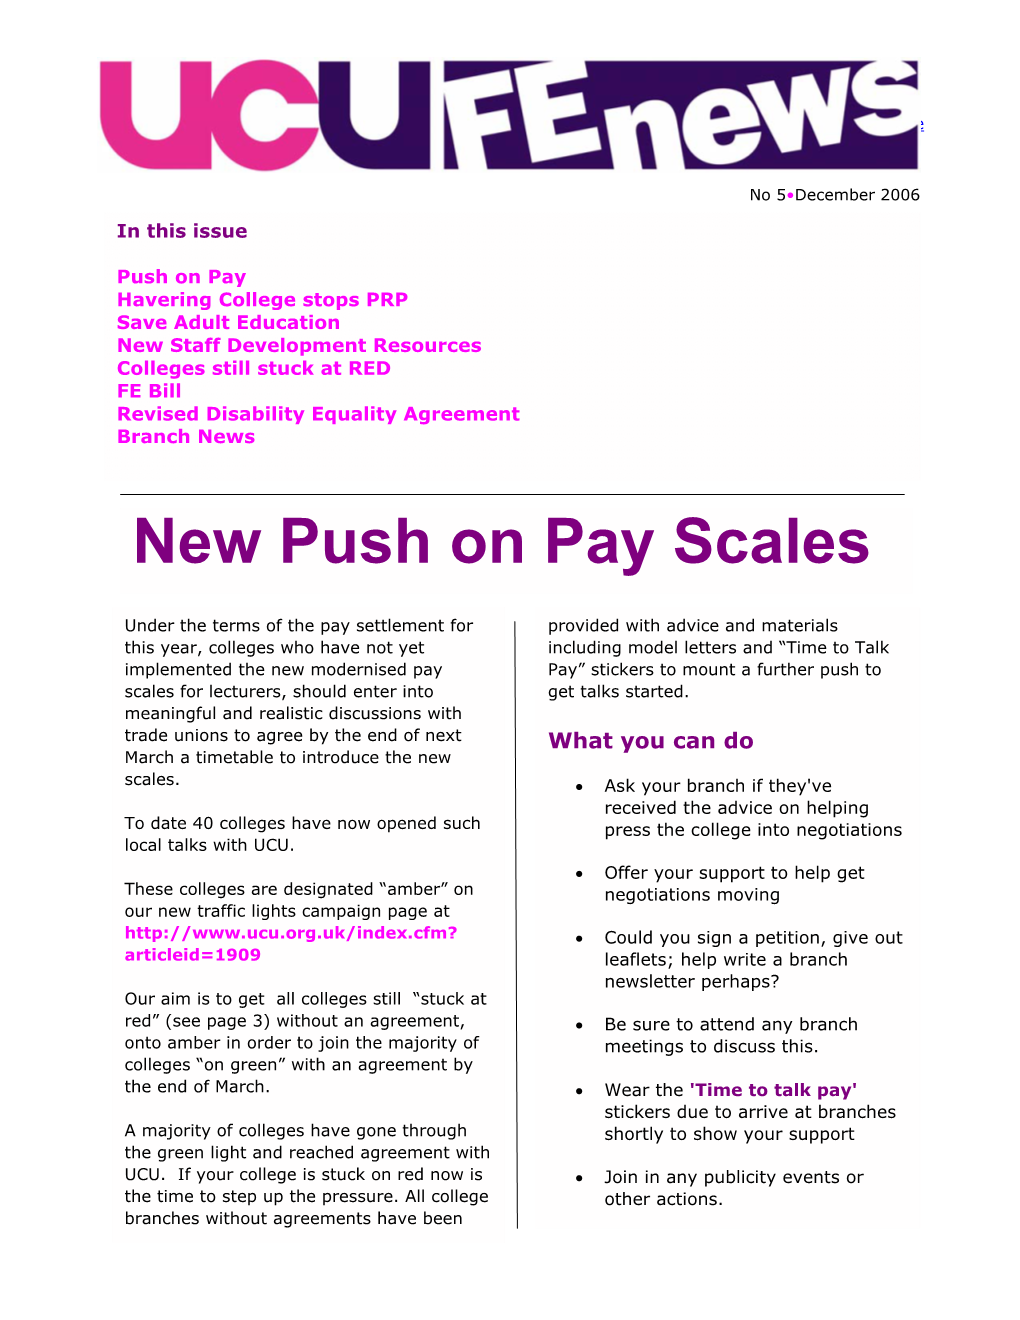 New Push on Pay Scales